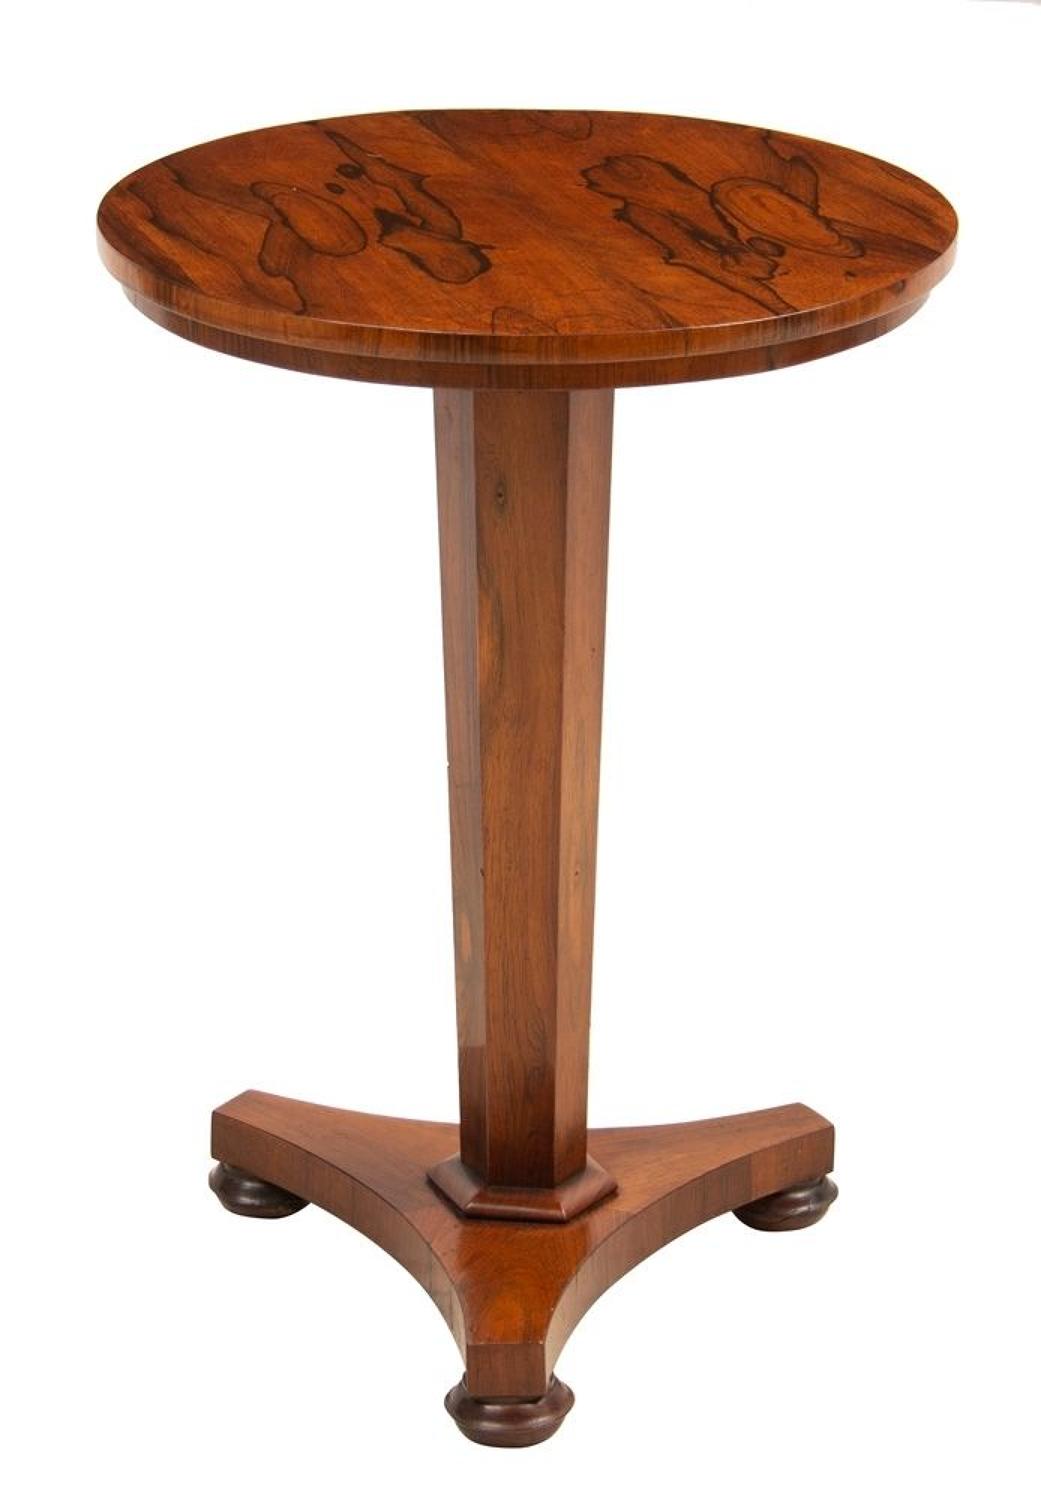 Victorian Side Table c.1860